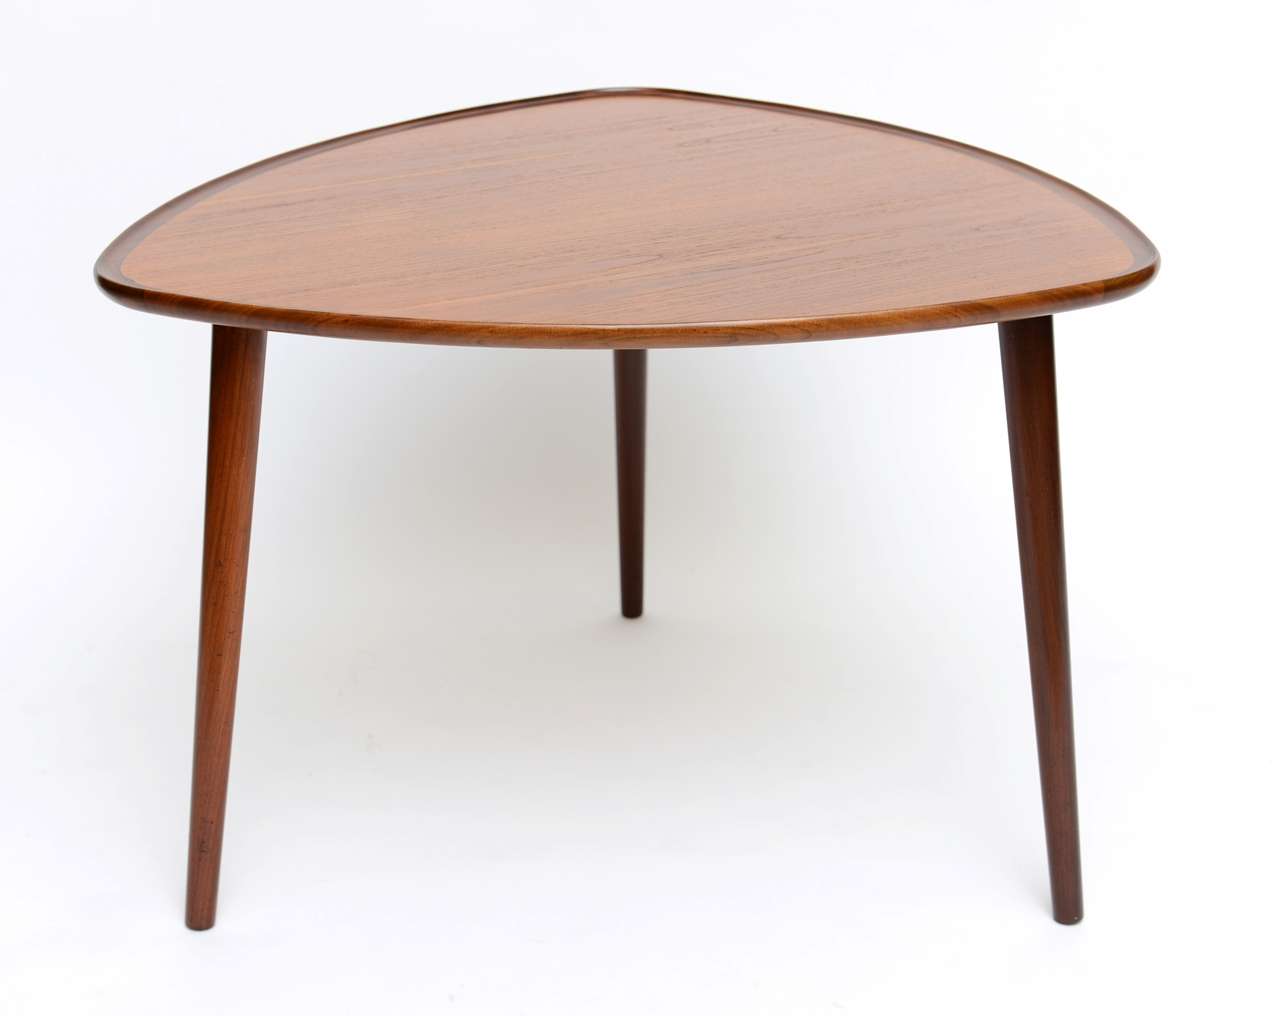 >>>SOLD......Wonderful warm teak and rosewood highlight this table exhibiting beautiful symmetry in the soft triangular form, outstanding cabinetry, artistry and quality from Denmark channeling Finn Juhl. Rising on three slanted solid teak tapering